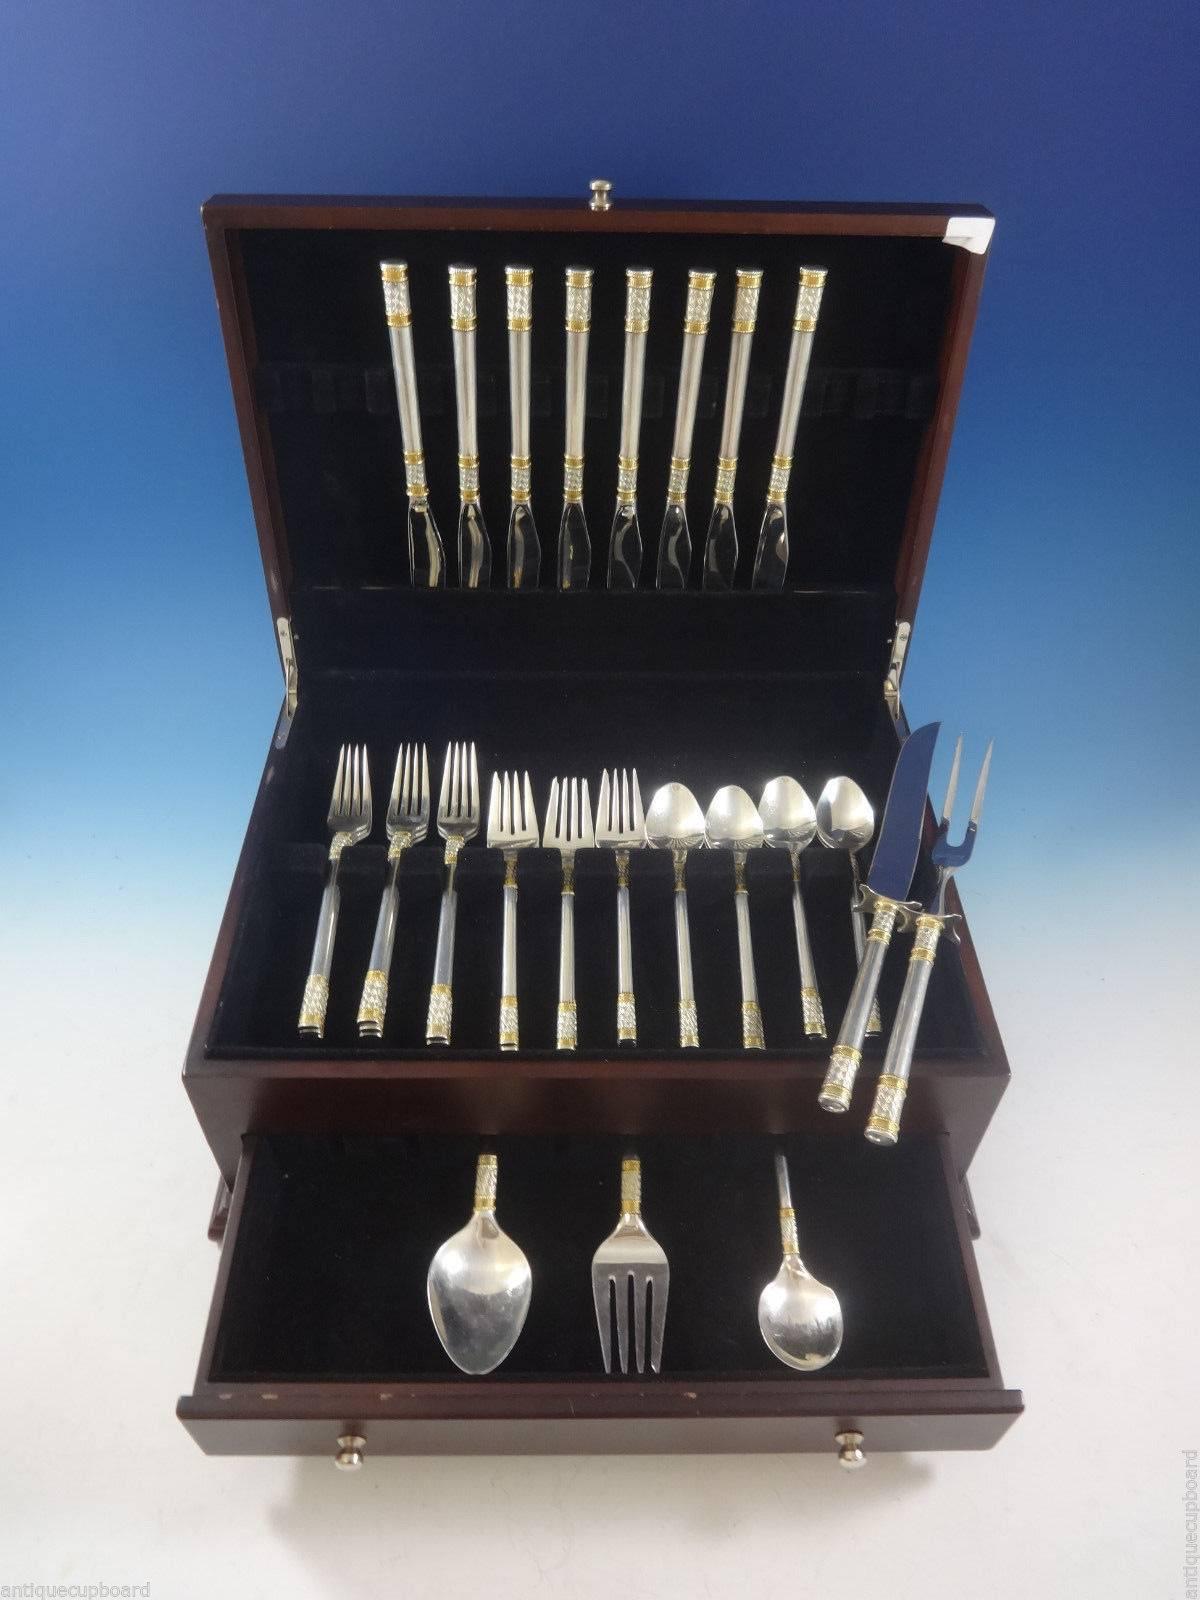 Aegean Weave Gold Accent flatware by Wallace Silver. The birthplace of culture, the Aegean was the sea from which early Mediterranean societies drew their sustenance. The nets and baskets hand woven by fishermen centuries ago are still in use along